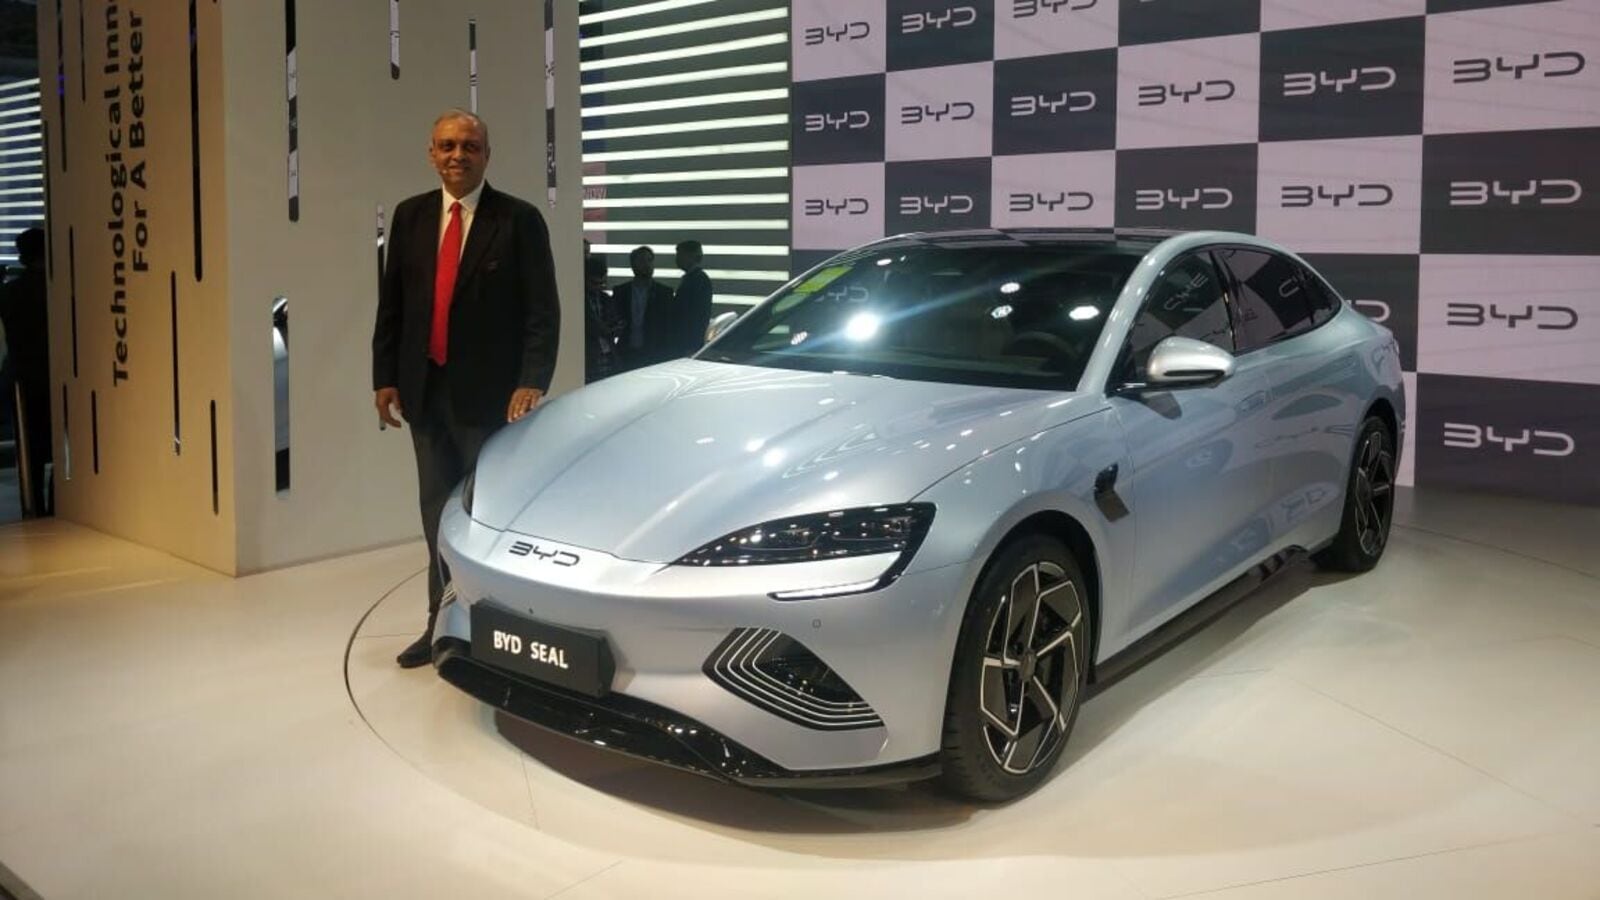 Auto Expo 2023 BYD Seal electric sedan makes India debut, deliveries